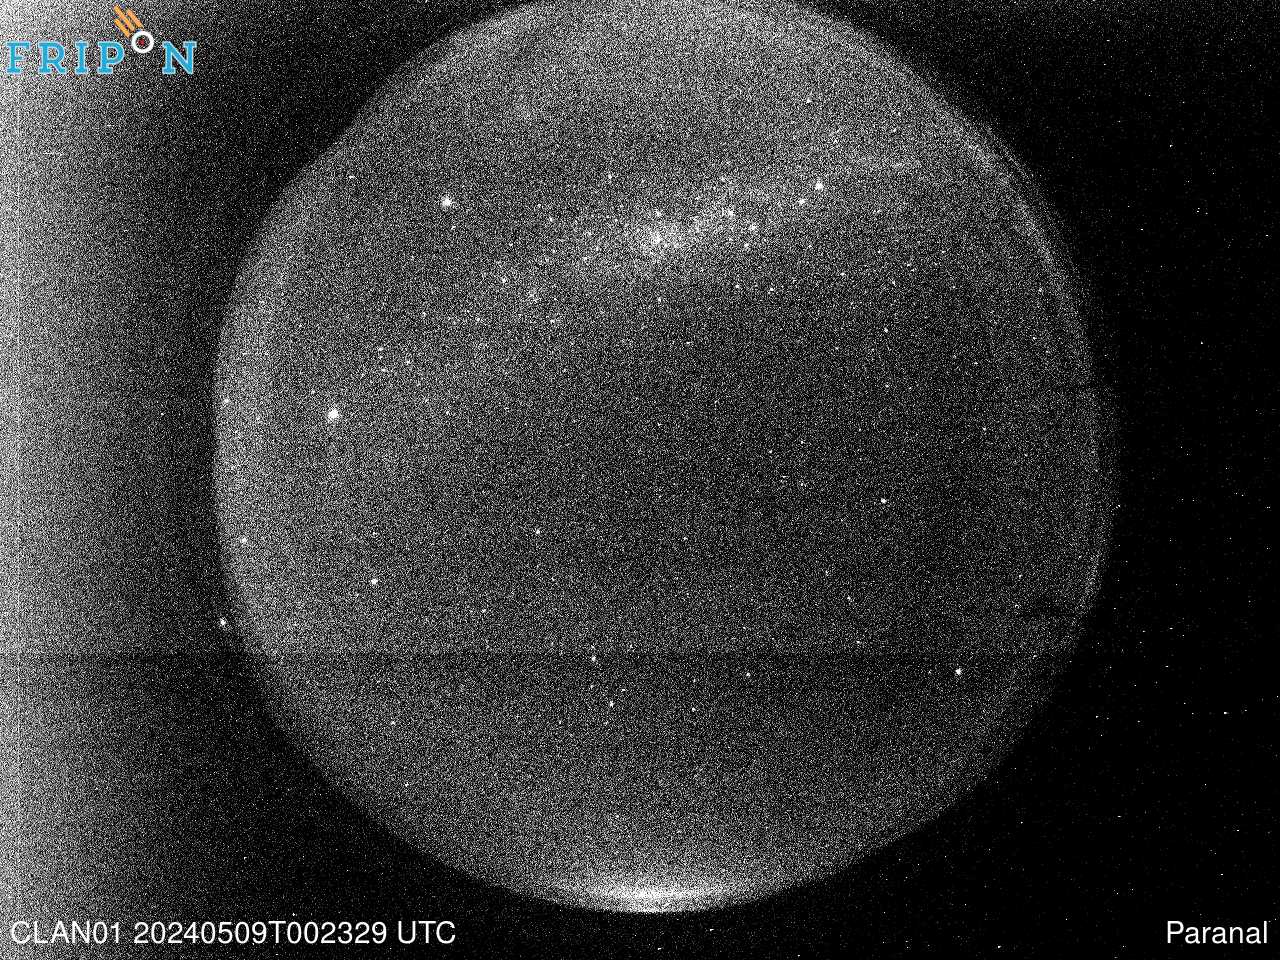 Full size image detection Cerro Paranal - ESO (CLAN01) Universal Time